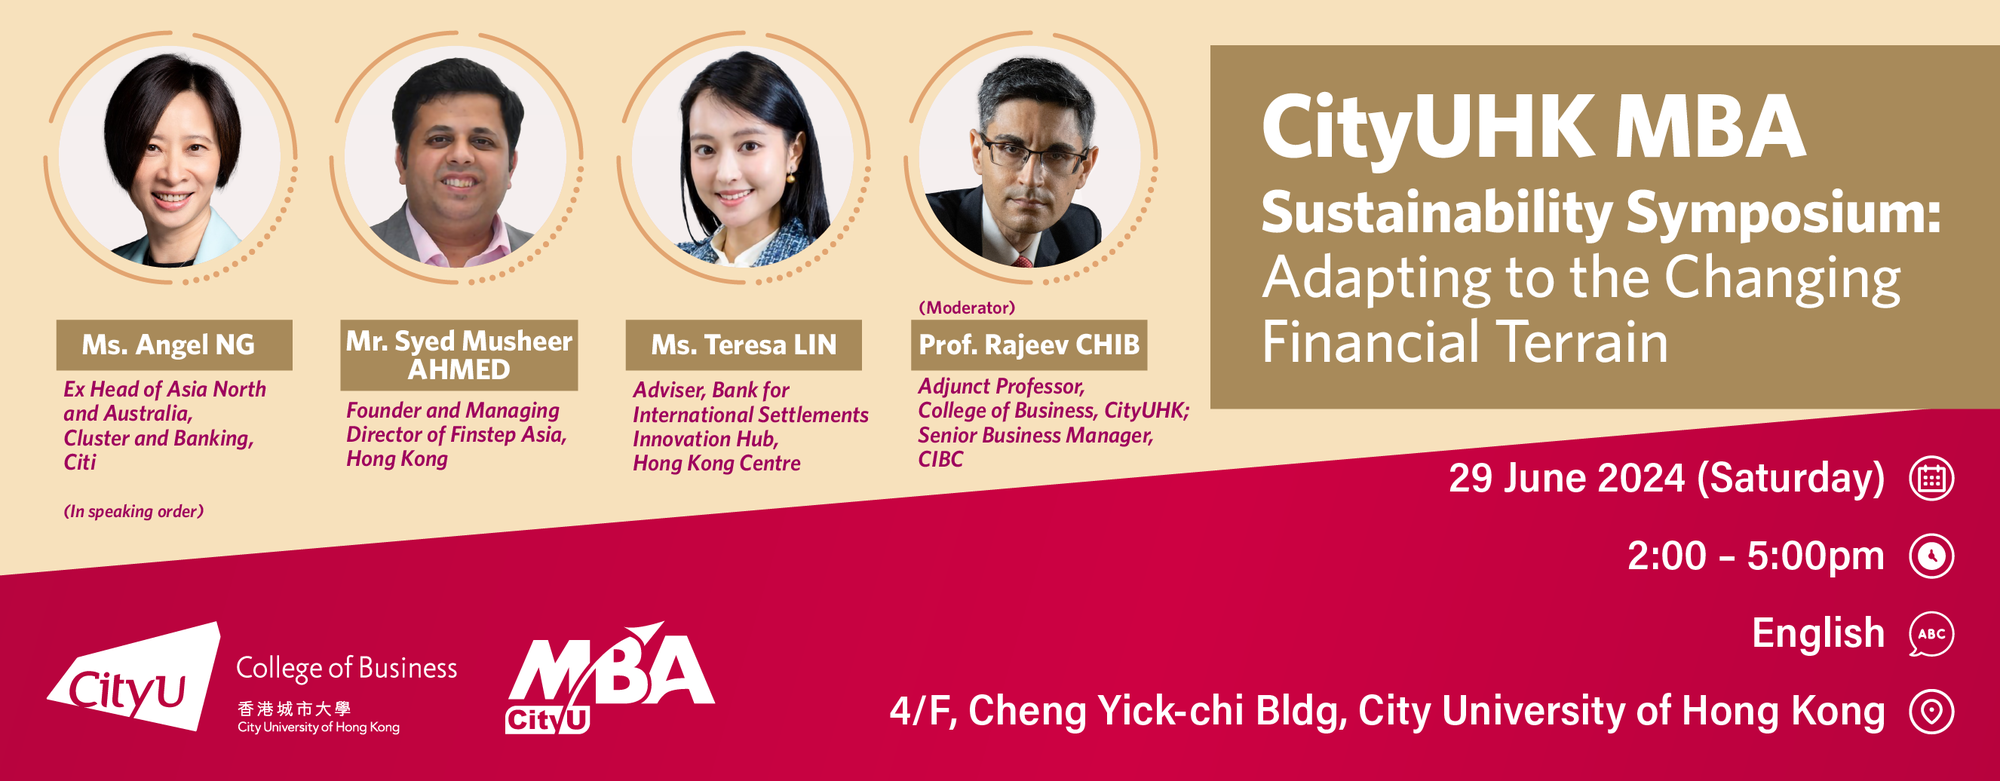 MBA Sustainability Symposium: Adapting to the Changing Financial Terrain